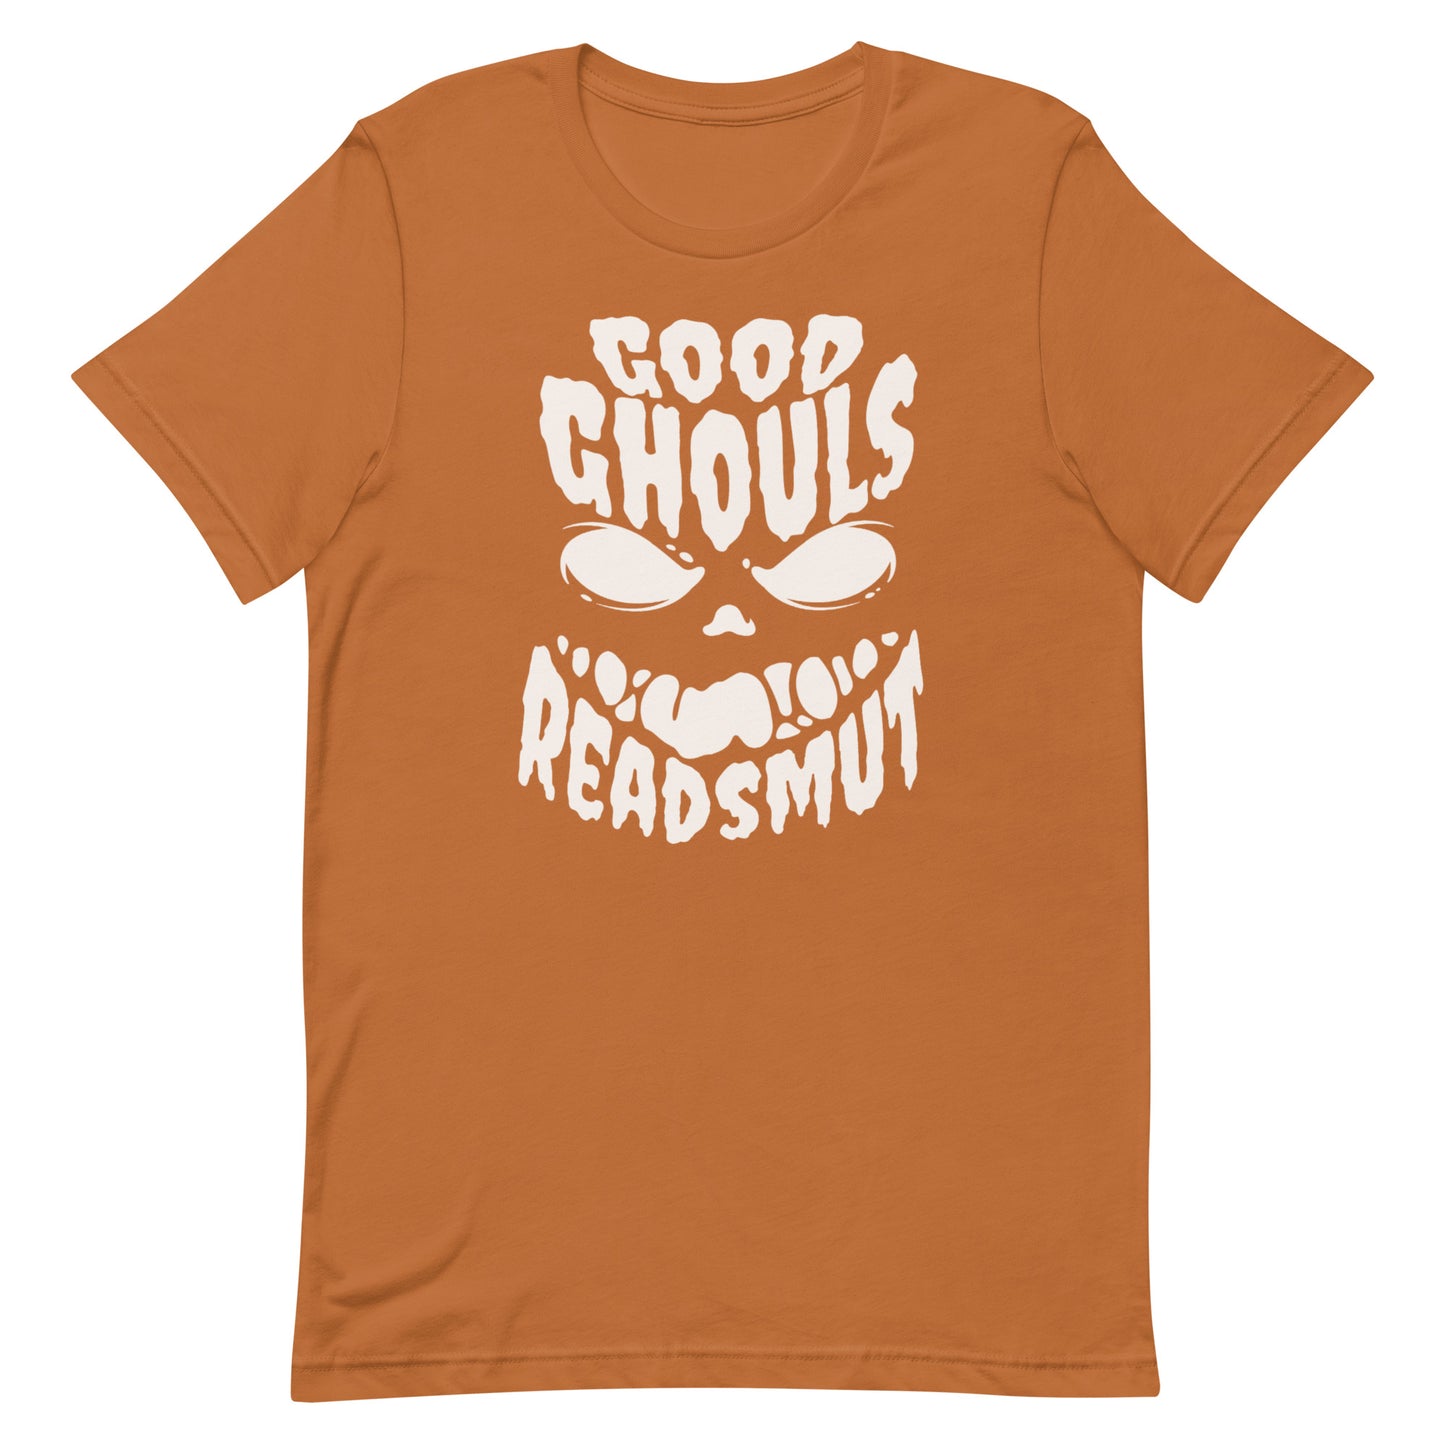 good ghouls read smut t-shirt